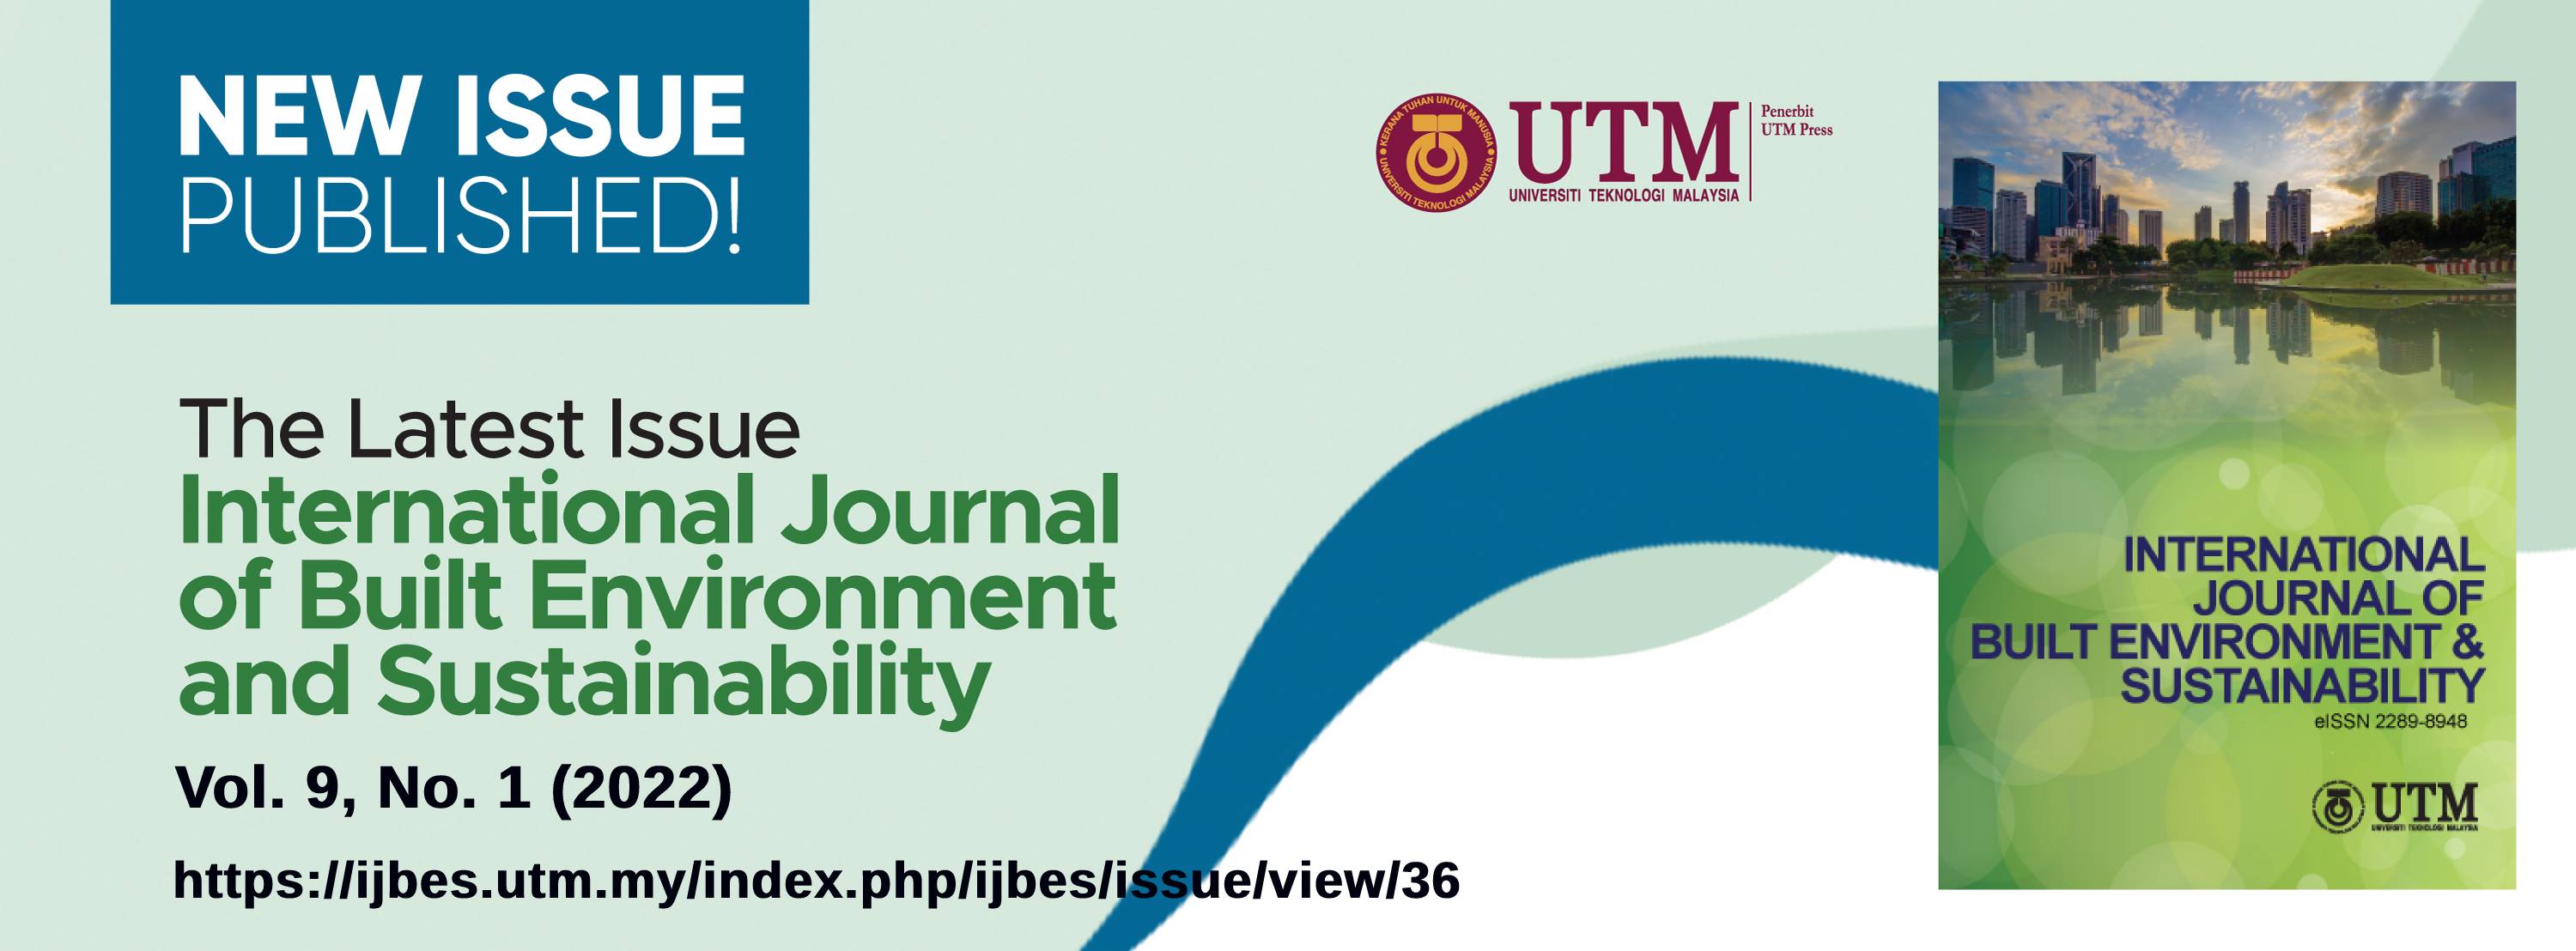 					View Vol. 9 No. 1 (2022): International Journal of Built Environment and Sustainability, Volume 9, Issue 1, 2022
				